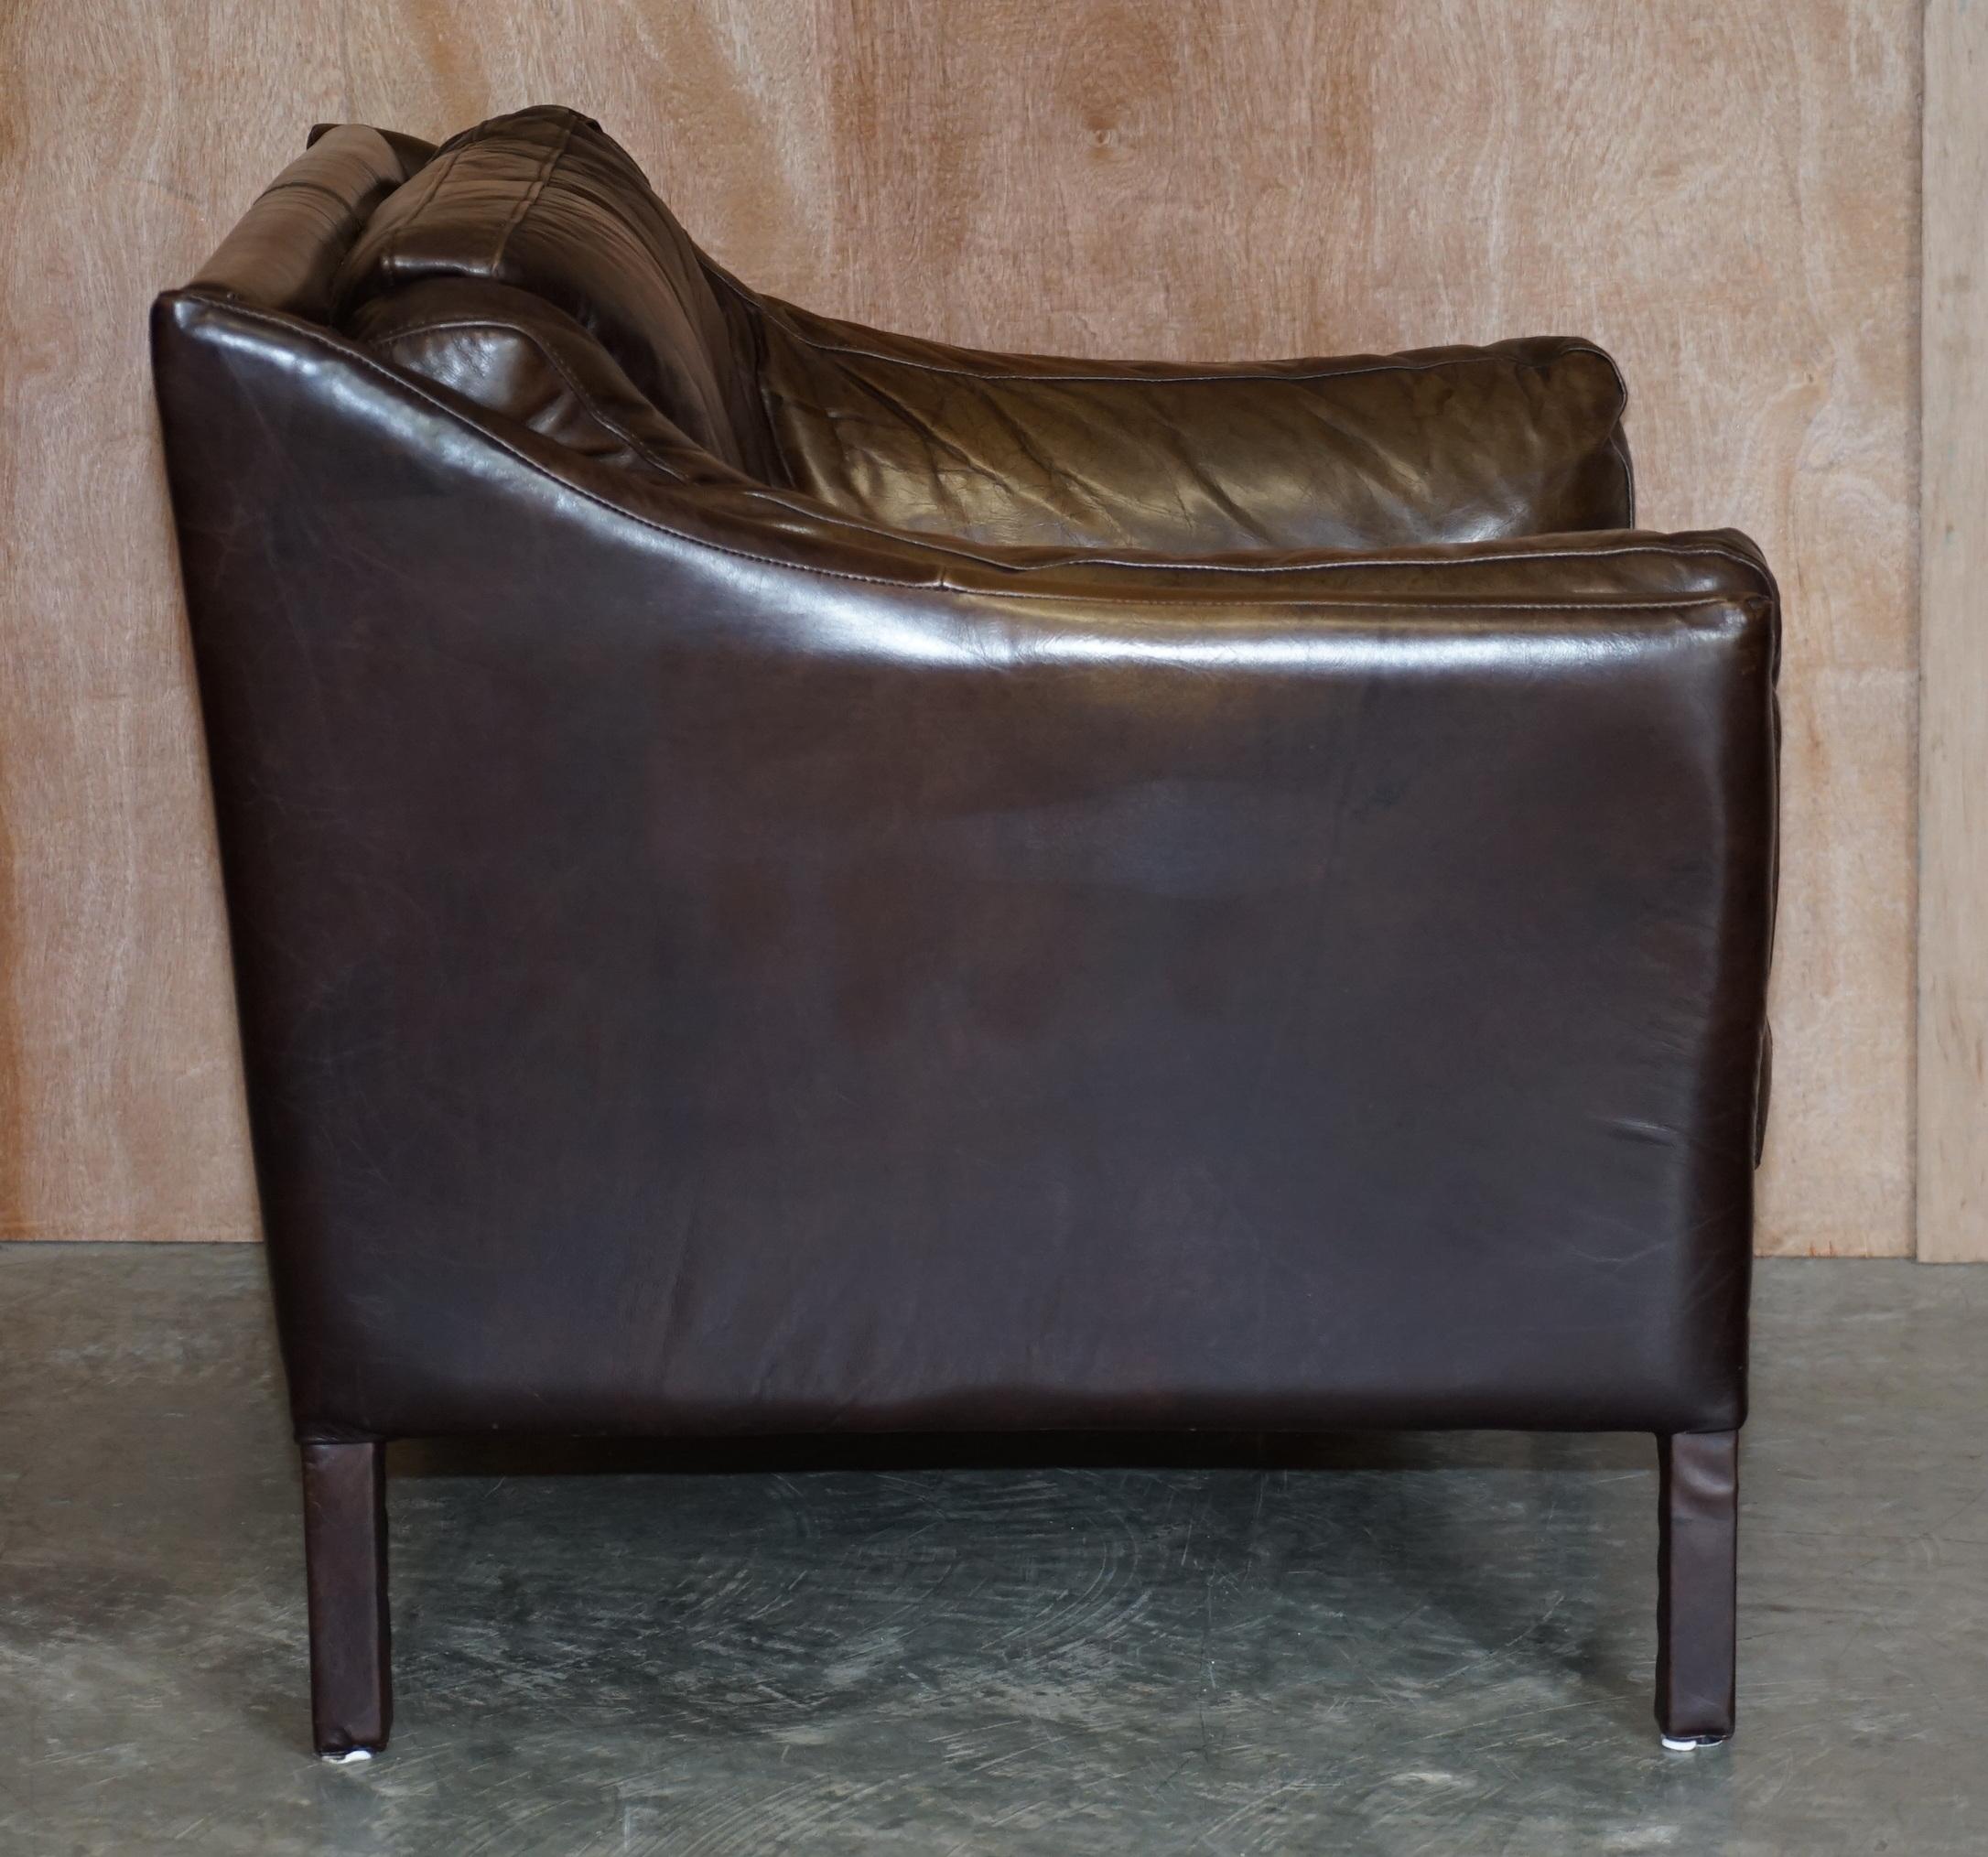 Halo Groucho Bike Tan Brown Leather Armchair Loveseat Part of a Large Suite 3